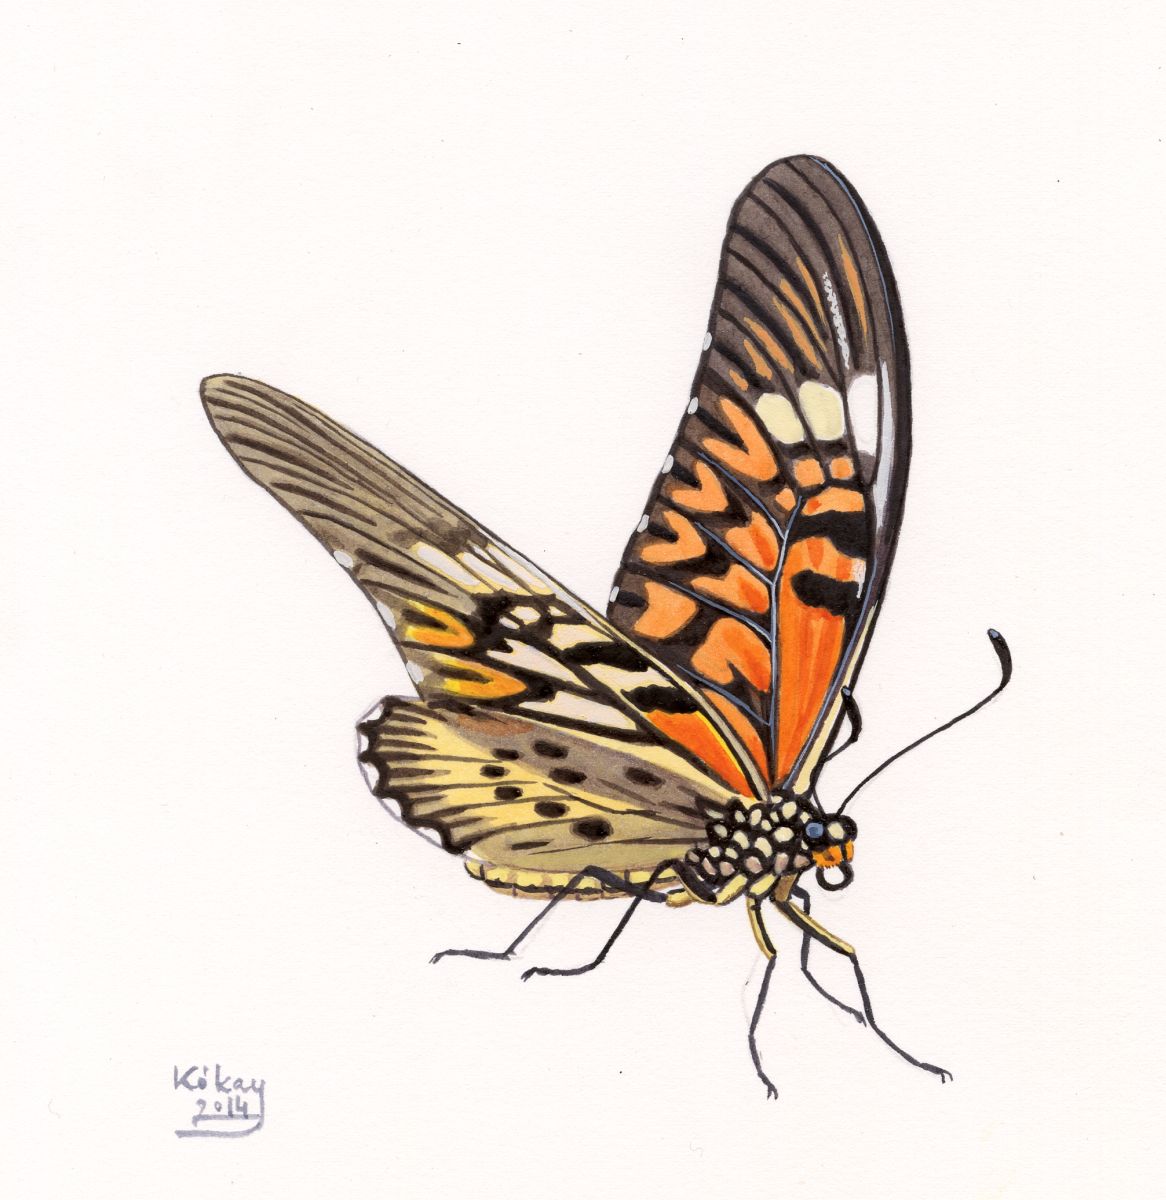 Giant African Swallowtail (Papilio antimachus), watercolour and bodycolour on paper